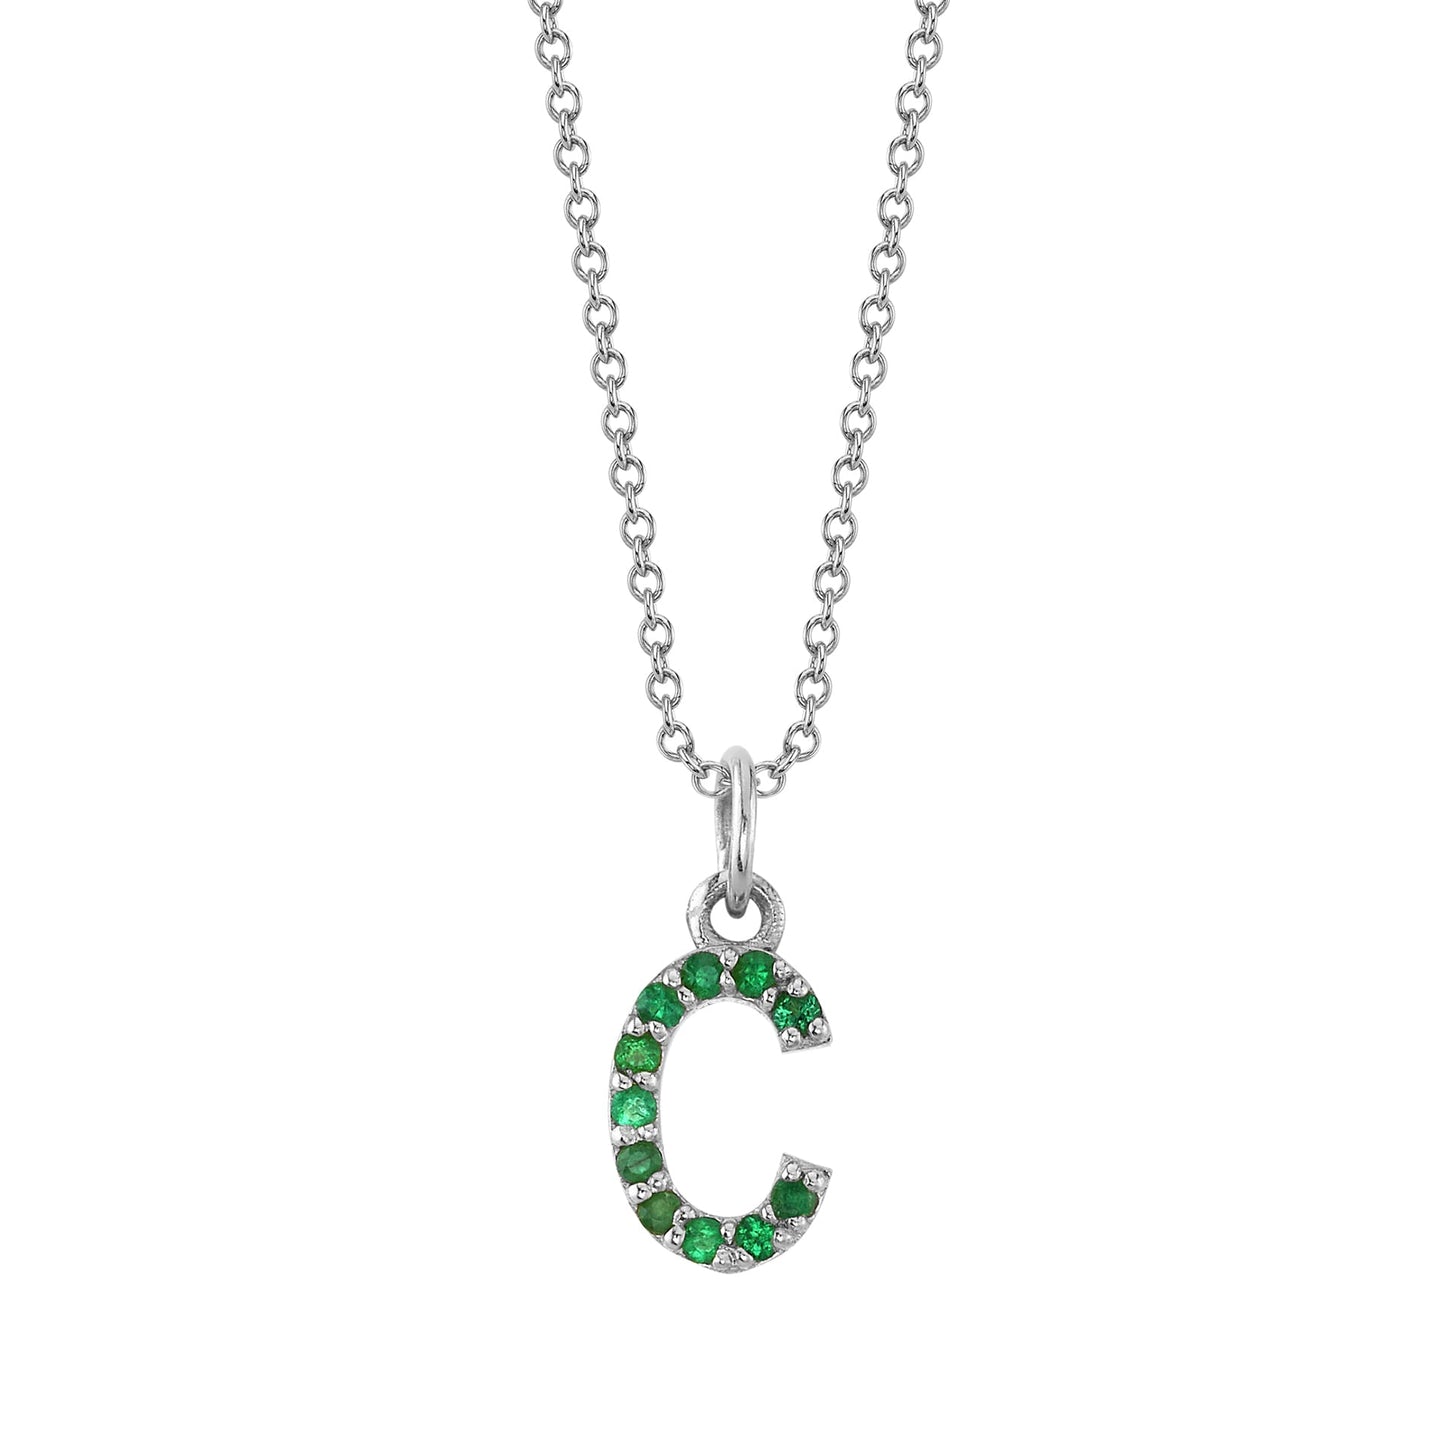 C Initial Birthstone Charm Necklace